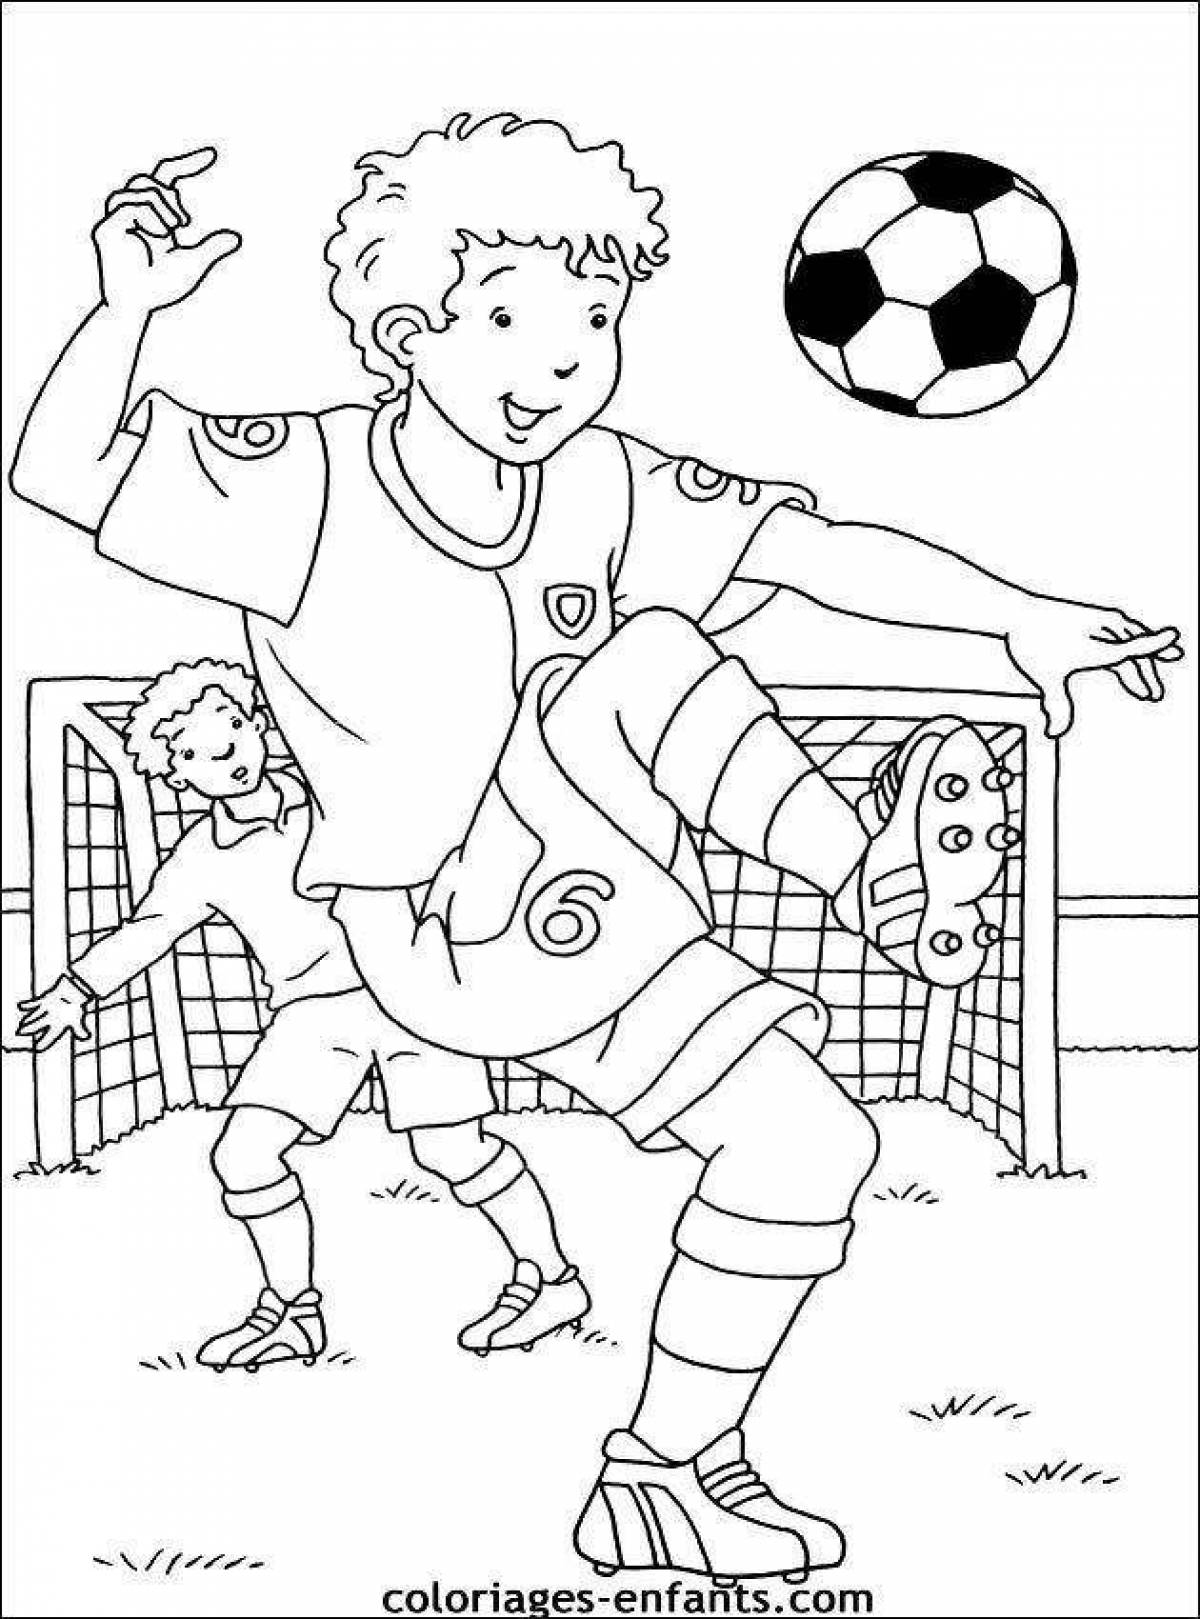 Fabulous football coloring book for kids